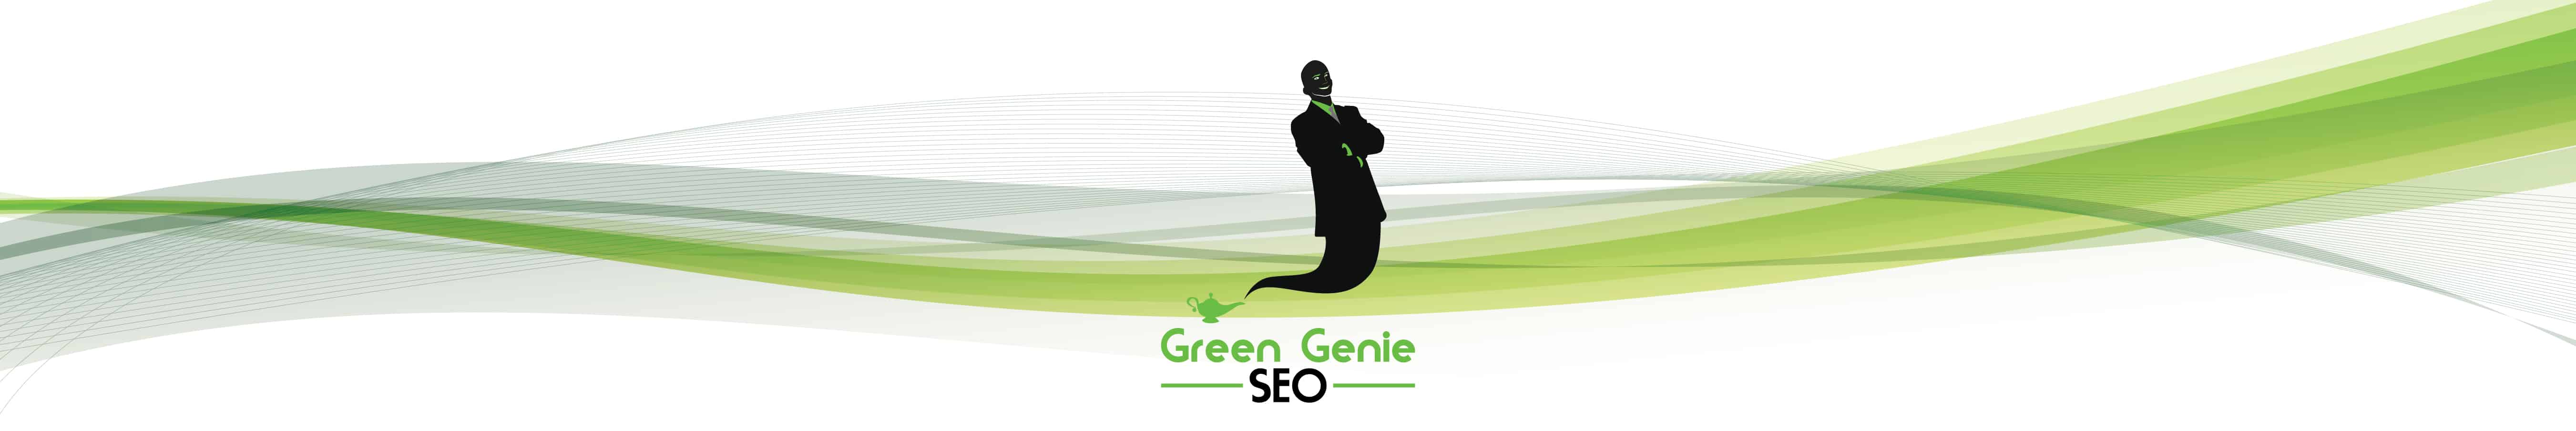 What is search engine optimization